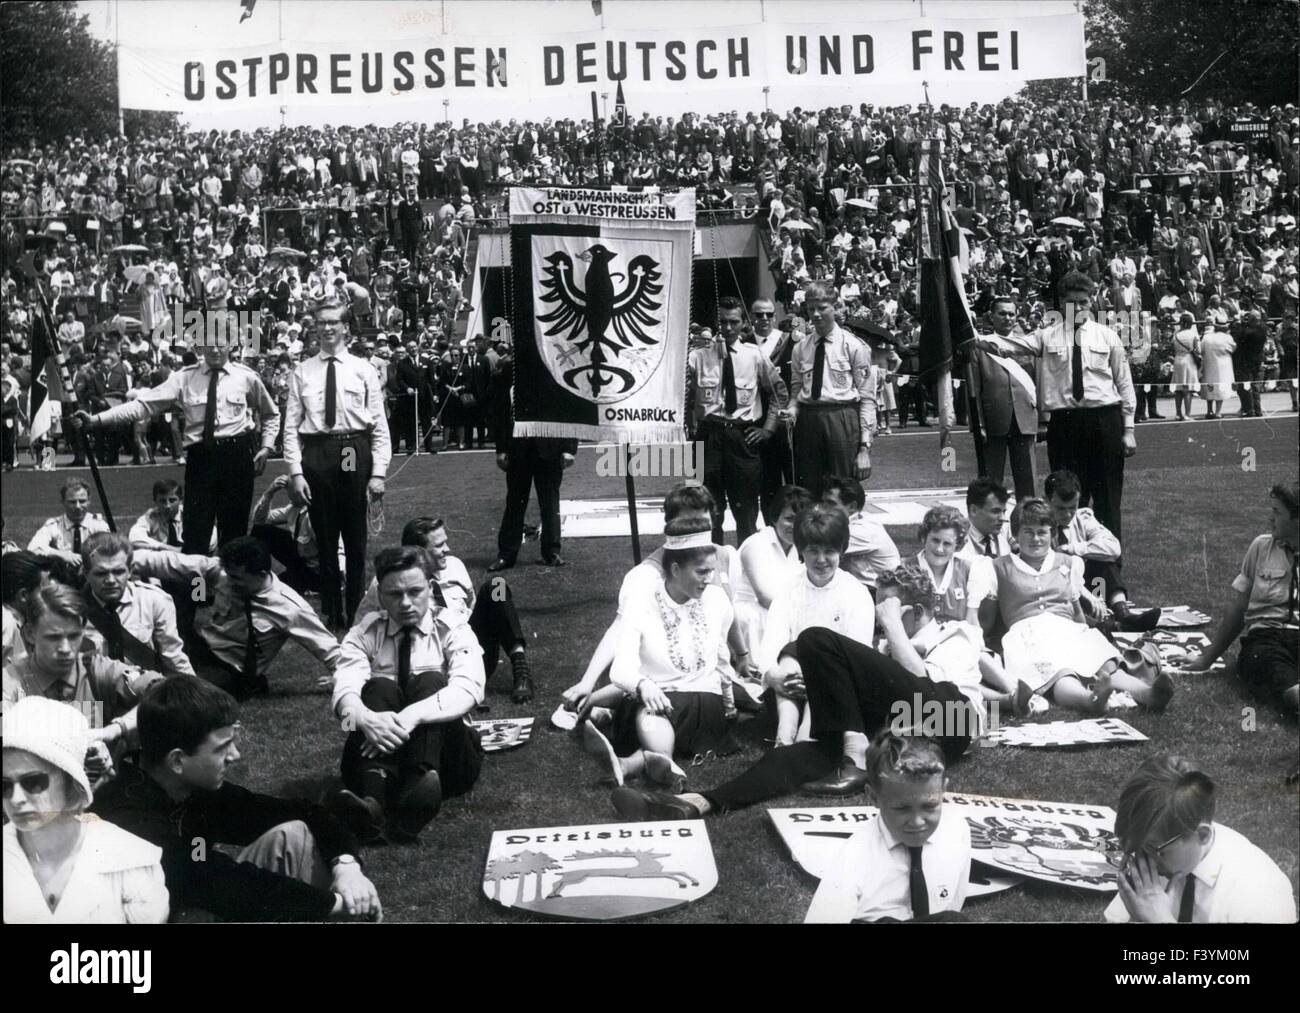 June 16, 1963 - Great meeting of the East Prussia-men in Dusseldorf In this day there is a great meeting of the East Prussia-men in Dusseldorf. The Eastern refugees demand at last 18 years after the second world-war the restitution of the German East countries to Germany which are all now under the Polish and the Russian governments. Today therefore war a great demonstration in the Rheinstadion in Dusseldorf where spoke the German Defence Minister Von Hassel, Our foto shows young East-Prussia-men during the great demonstration today in the Rheinstadion in Dusseldorf. Keystone Koln, 16.6.1963 ( Stock Photo